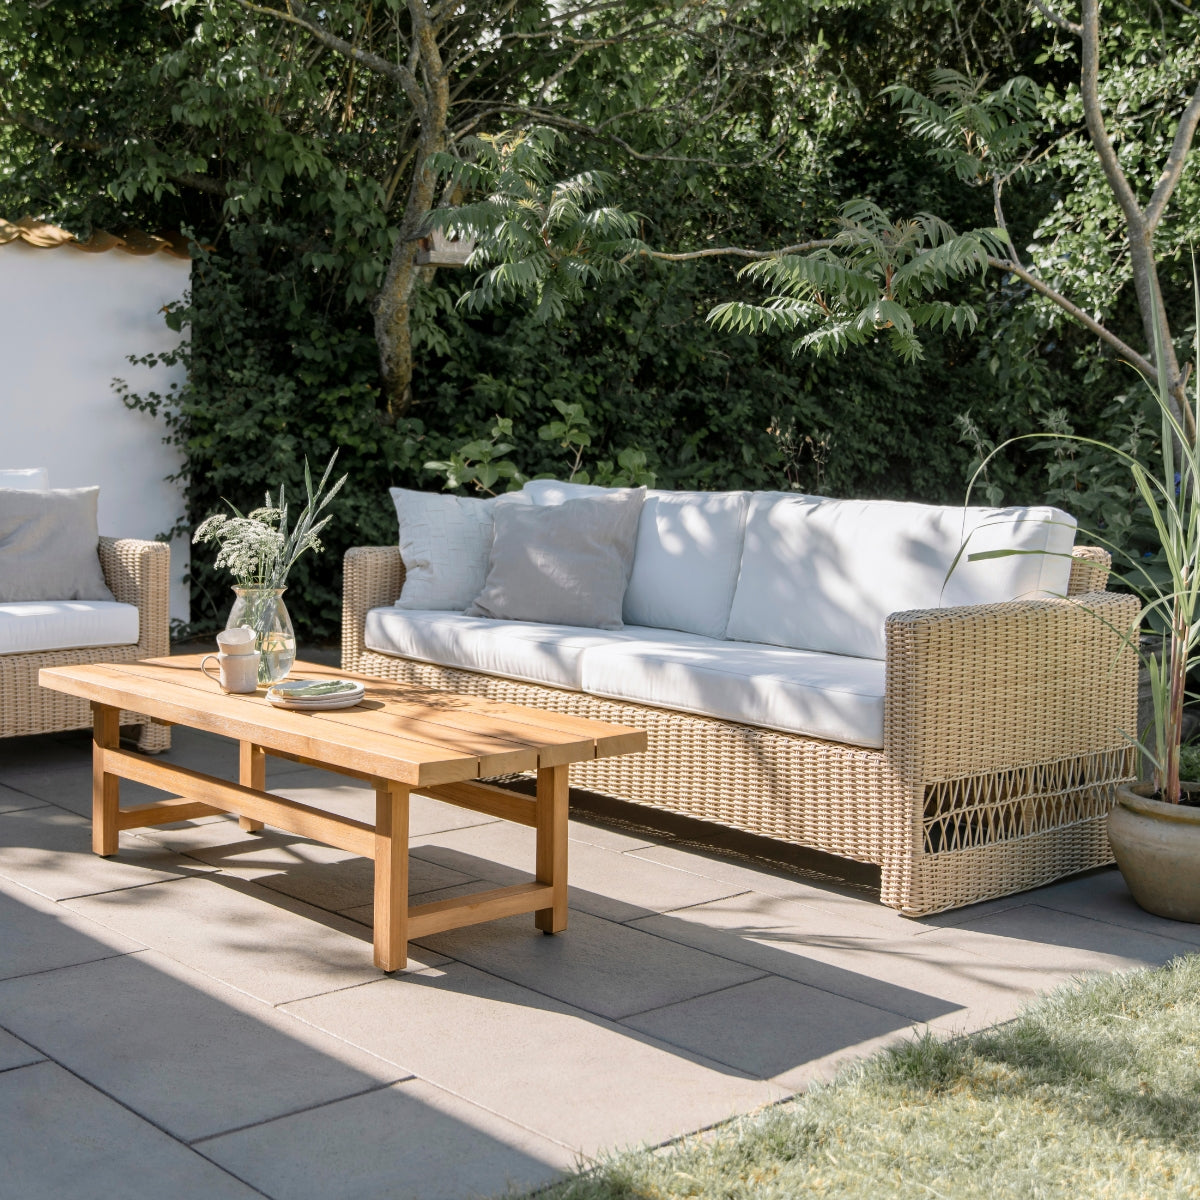 Sika-Design | Carrie 3 pers. Sofa - Outdoor